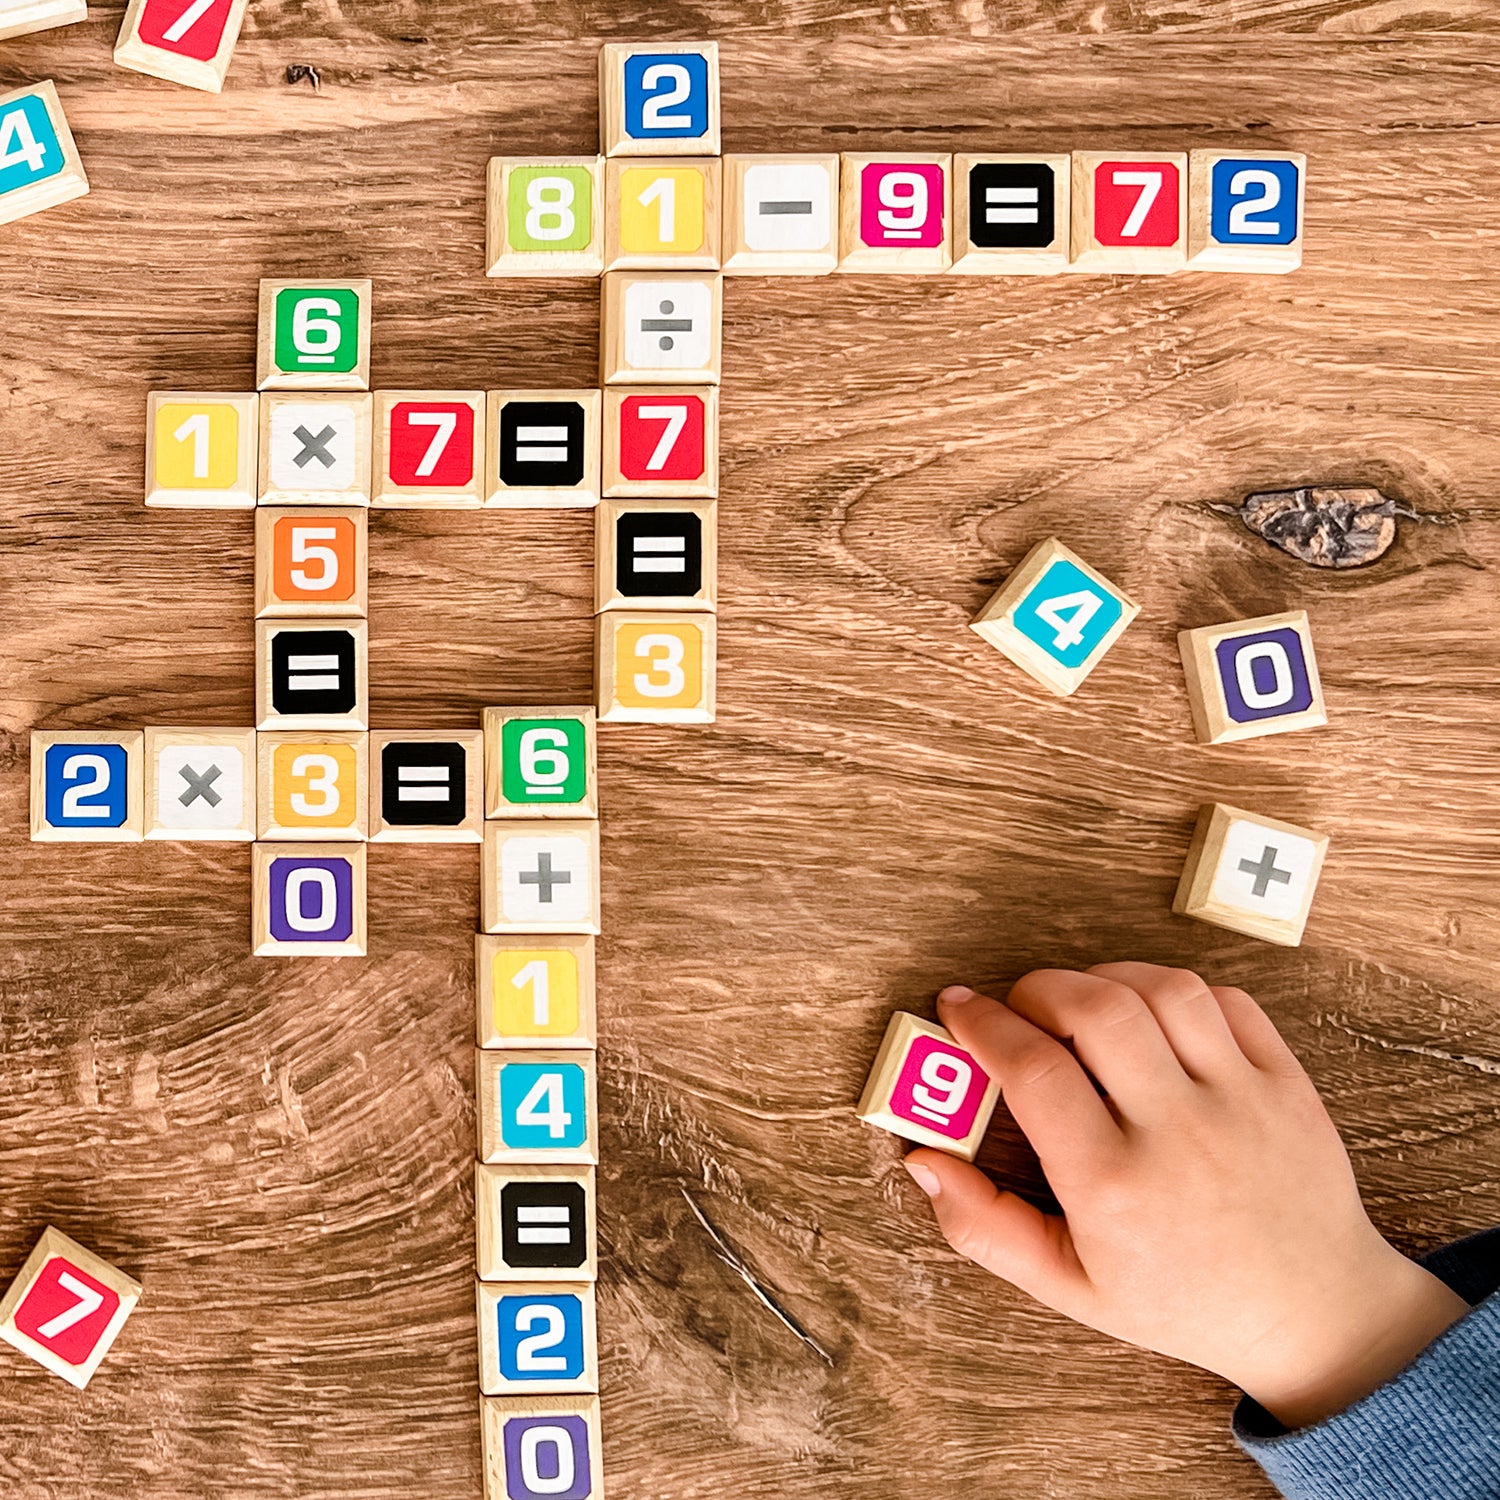 5 Fun Tic Tac Toe Math Games That Will Make Your Child Really